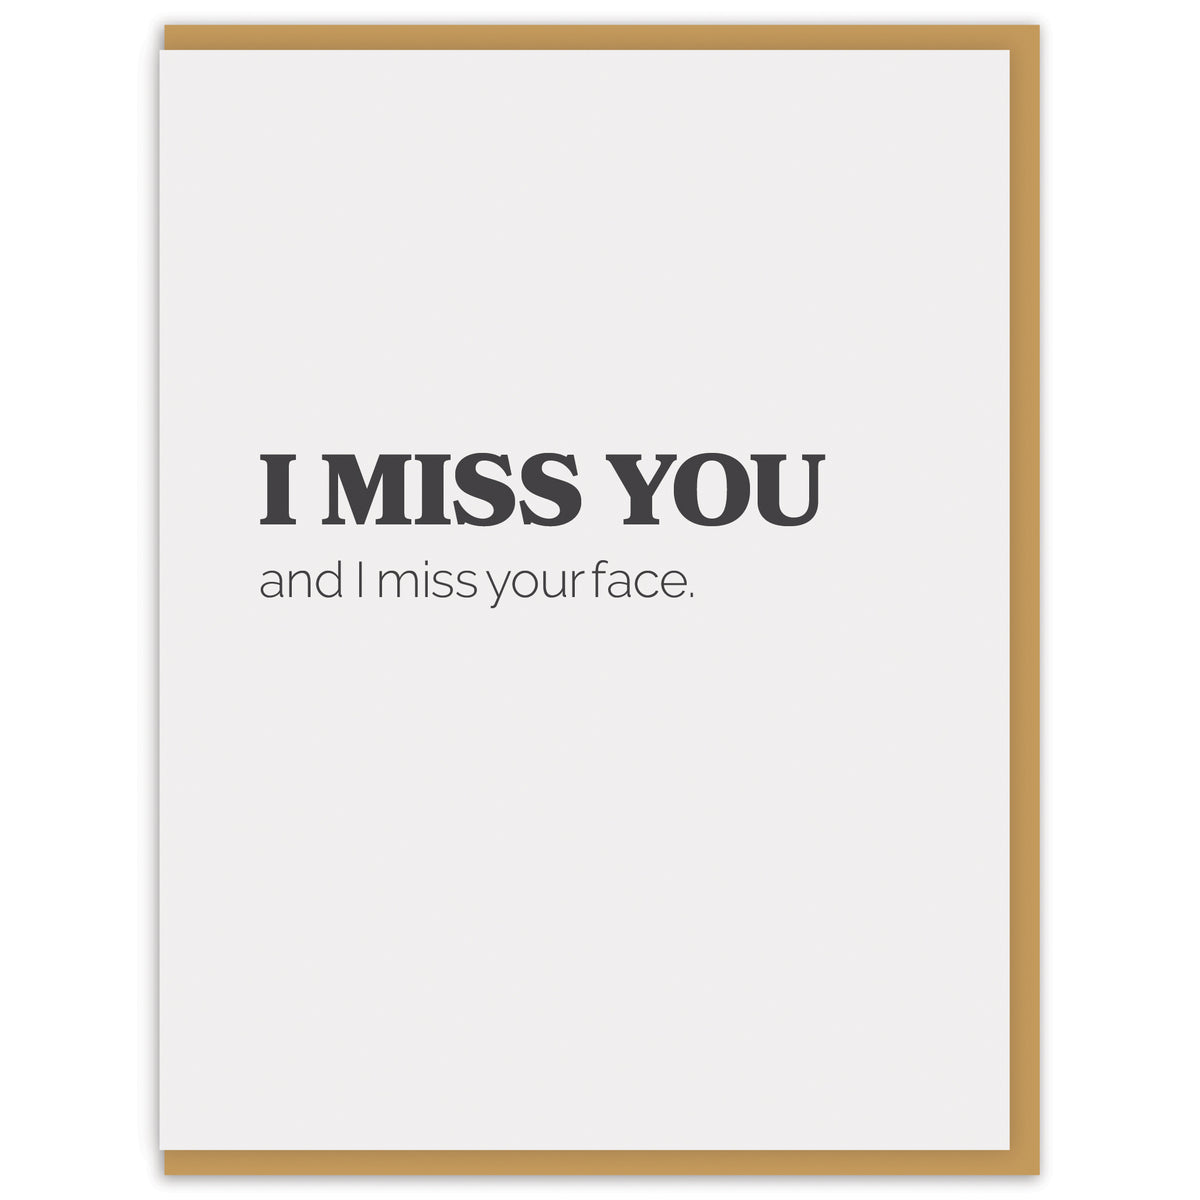 I miss you and I miss your face.